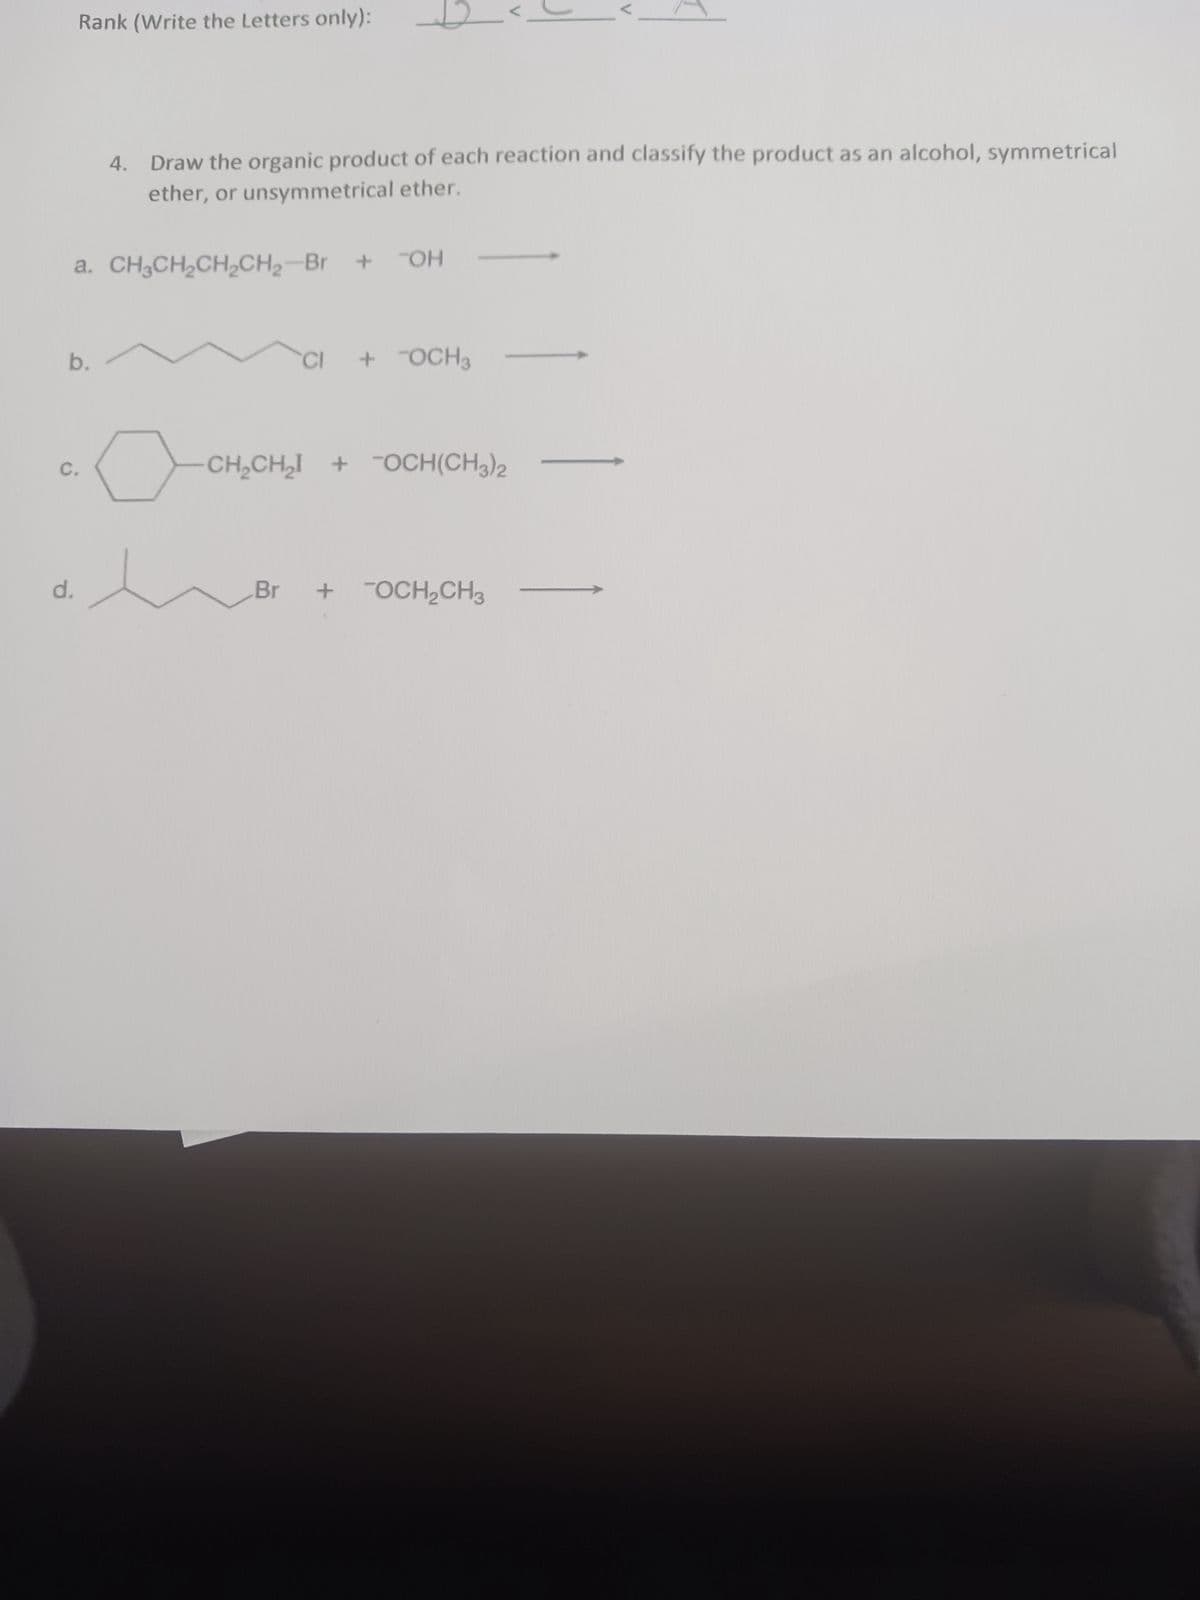 C.
Rank (Write the Letters only):
d.
4.
a. CH₂CH₂CH₂CH₂-Br + OH
Draw the organic product of each reaction and classify the product as an alcohol, symmetrical
ether, or unsymmetrical ether.
+ OCH3
CH₂CH₂ + OCH(CH3)2
Br
+ -OCH₂CH3